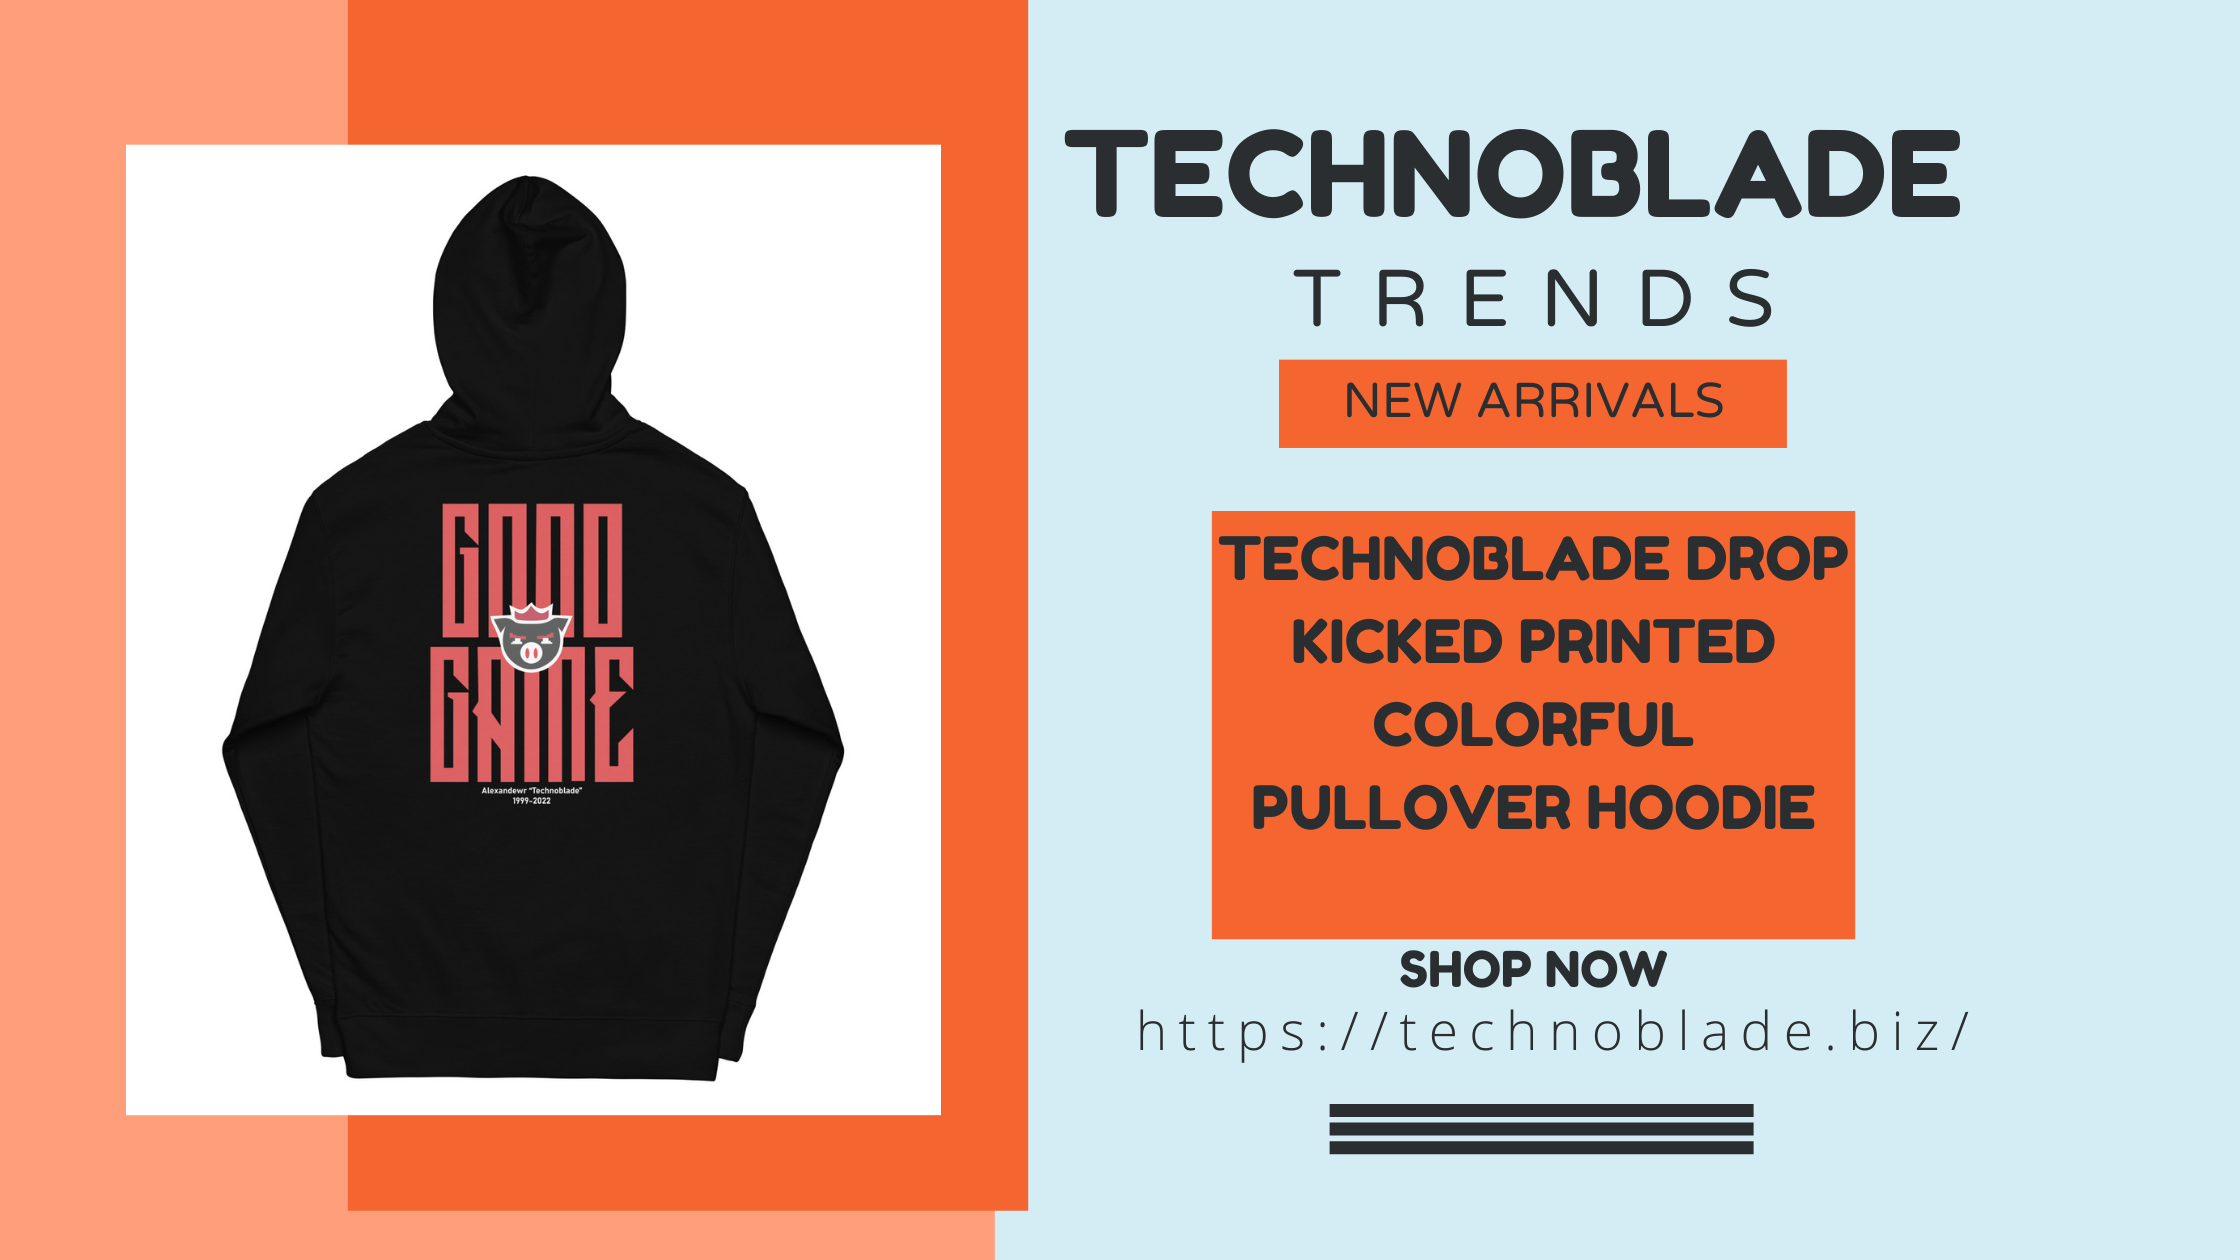 Show Your Support For Technoblade And Get Official Merchandise Now!